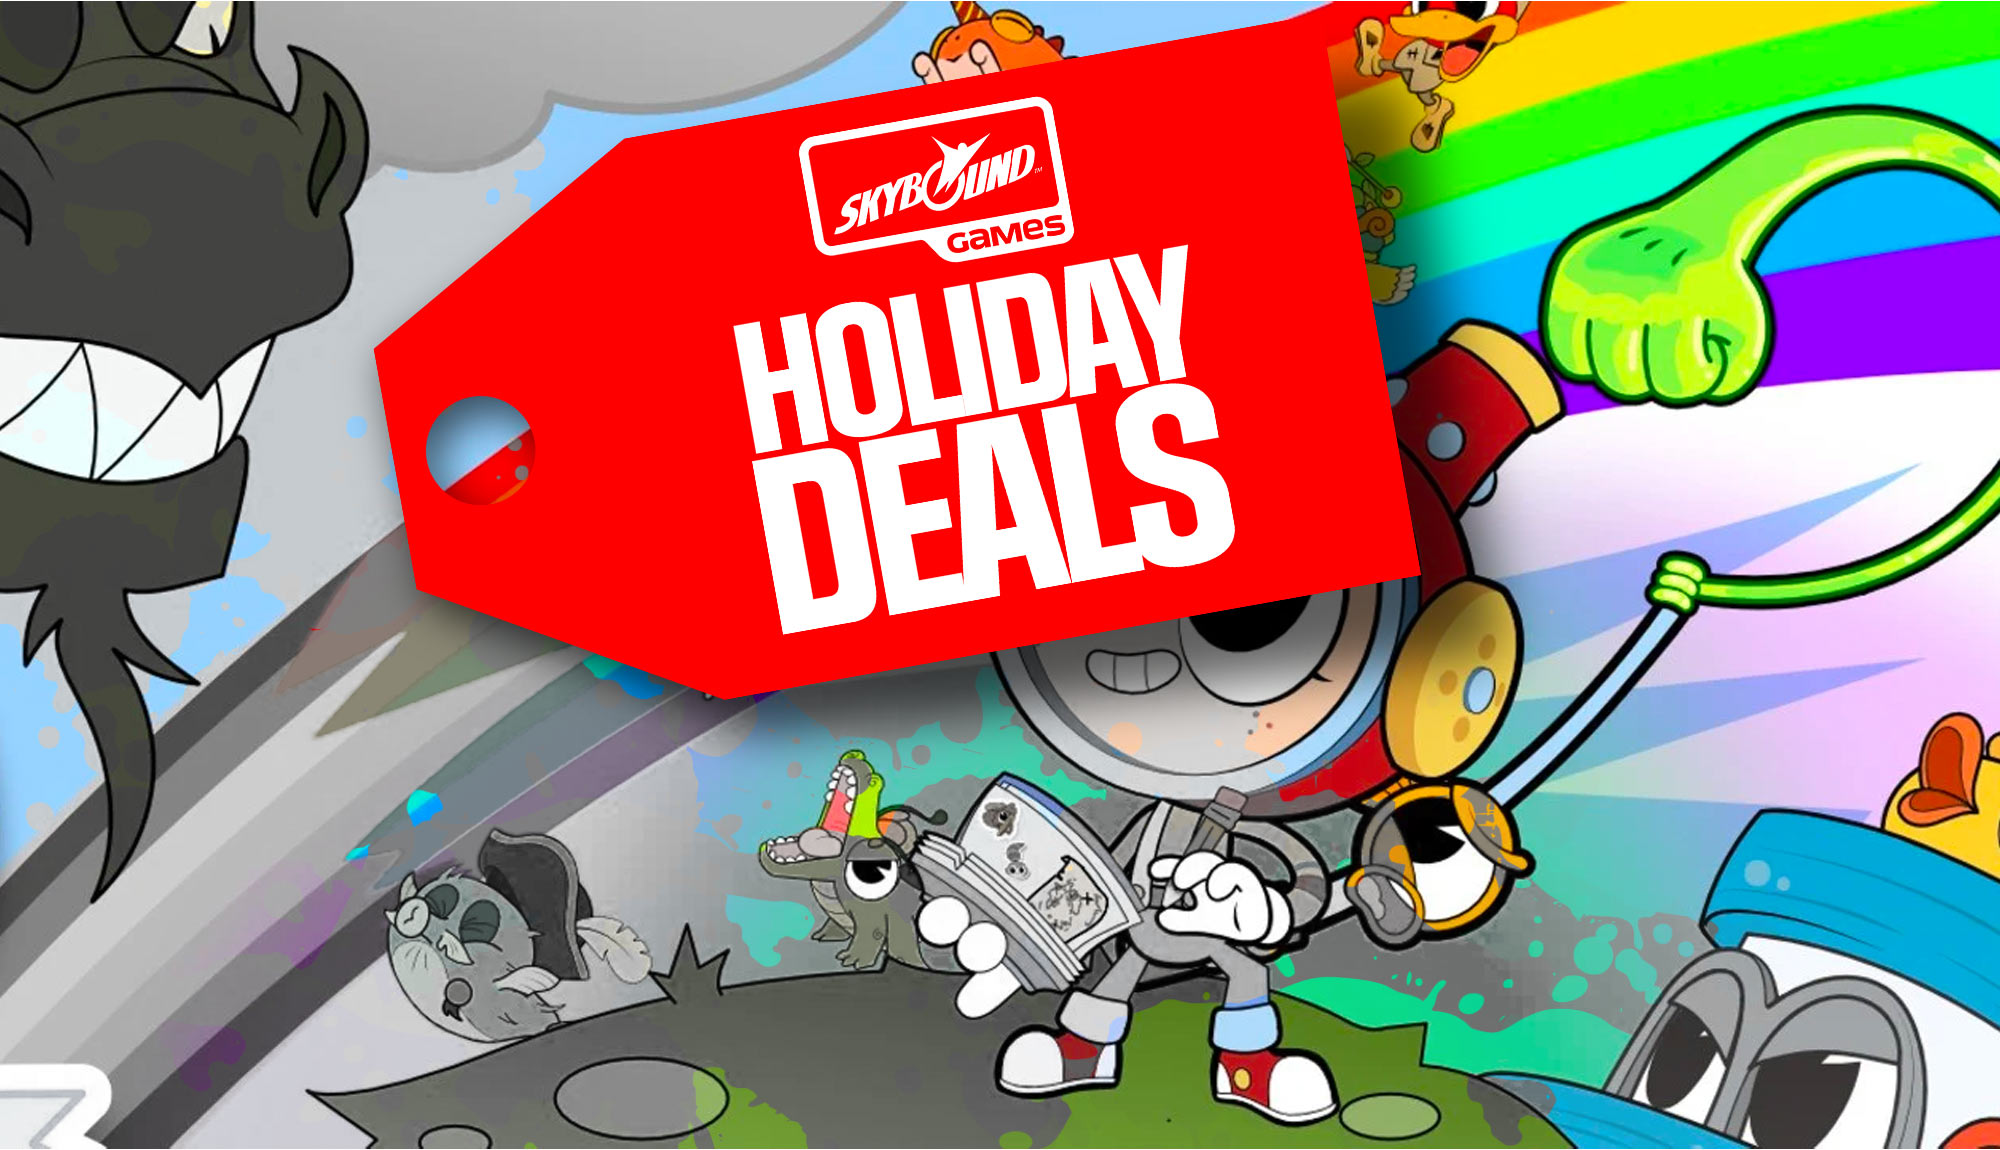 Black Friday and the Holidays Bring Skybound Games Deals!